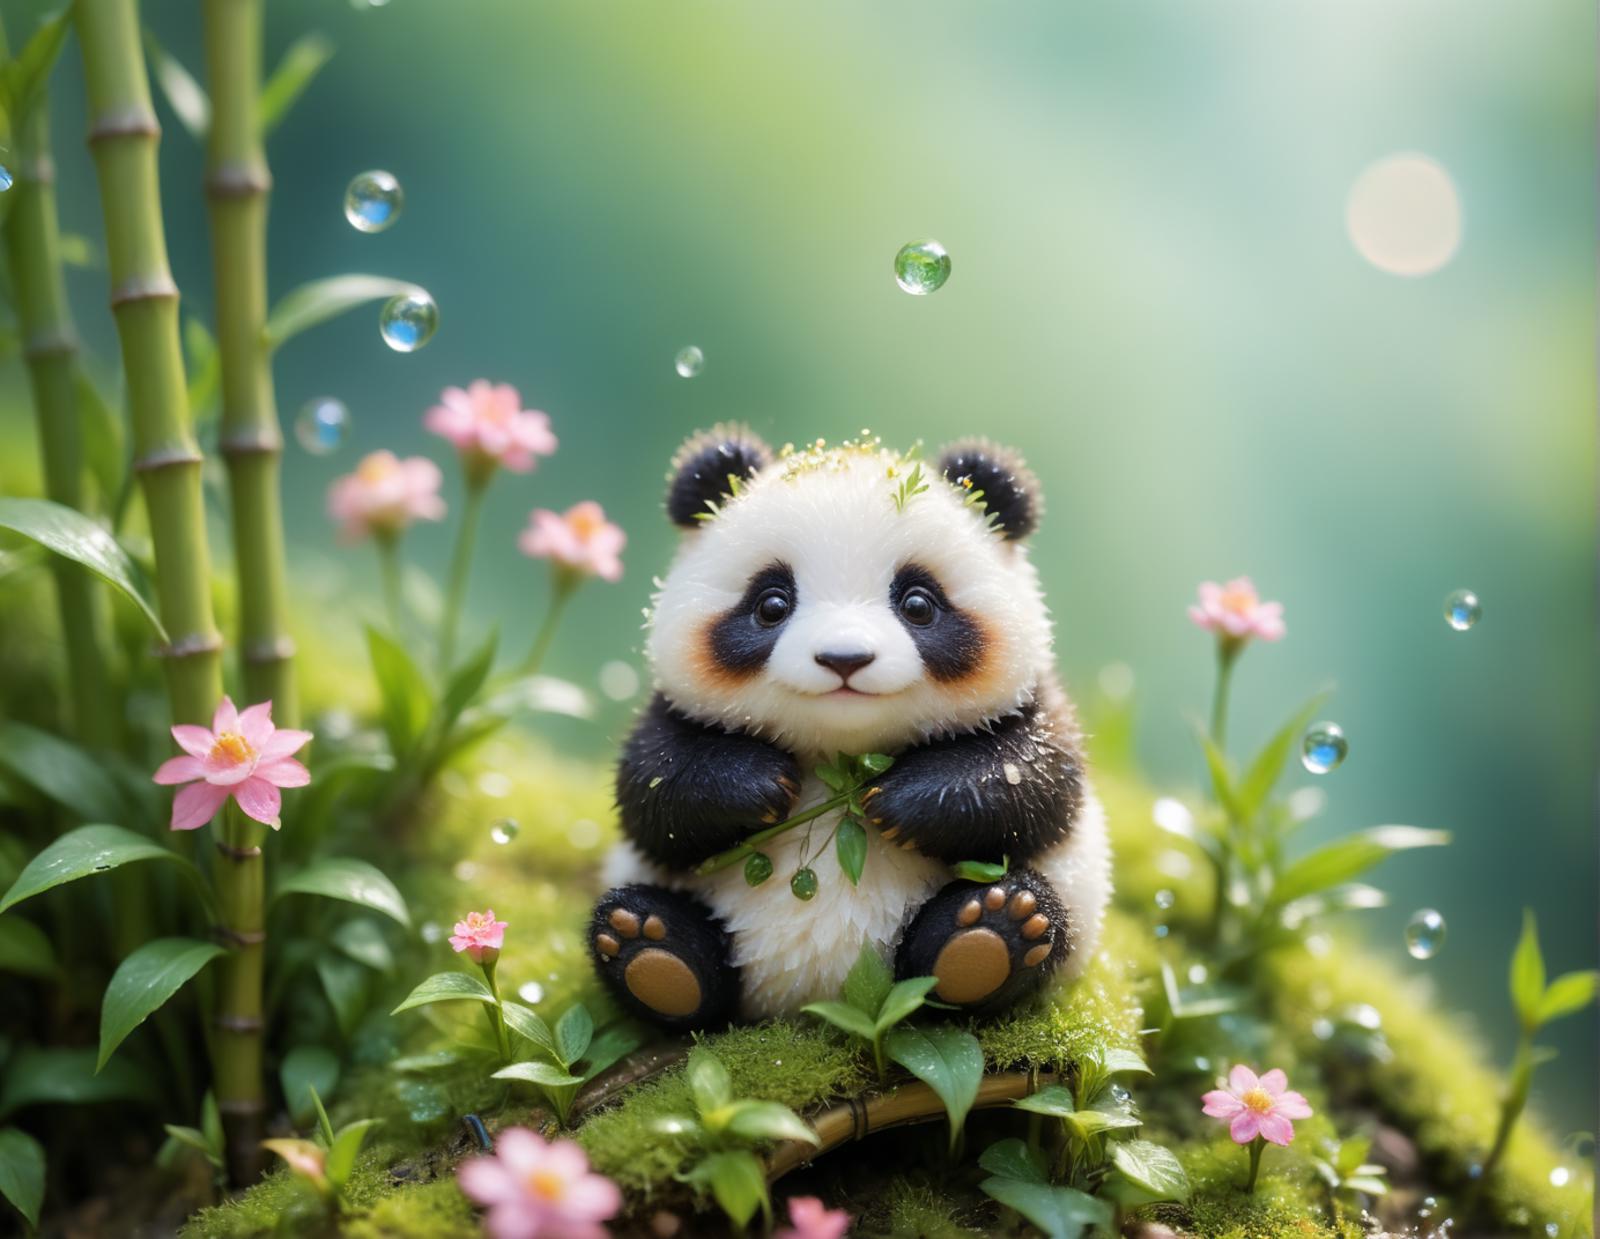 A Panda Bear in a Garden with Bubbles in the Air